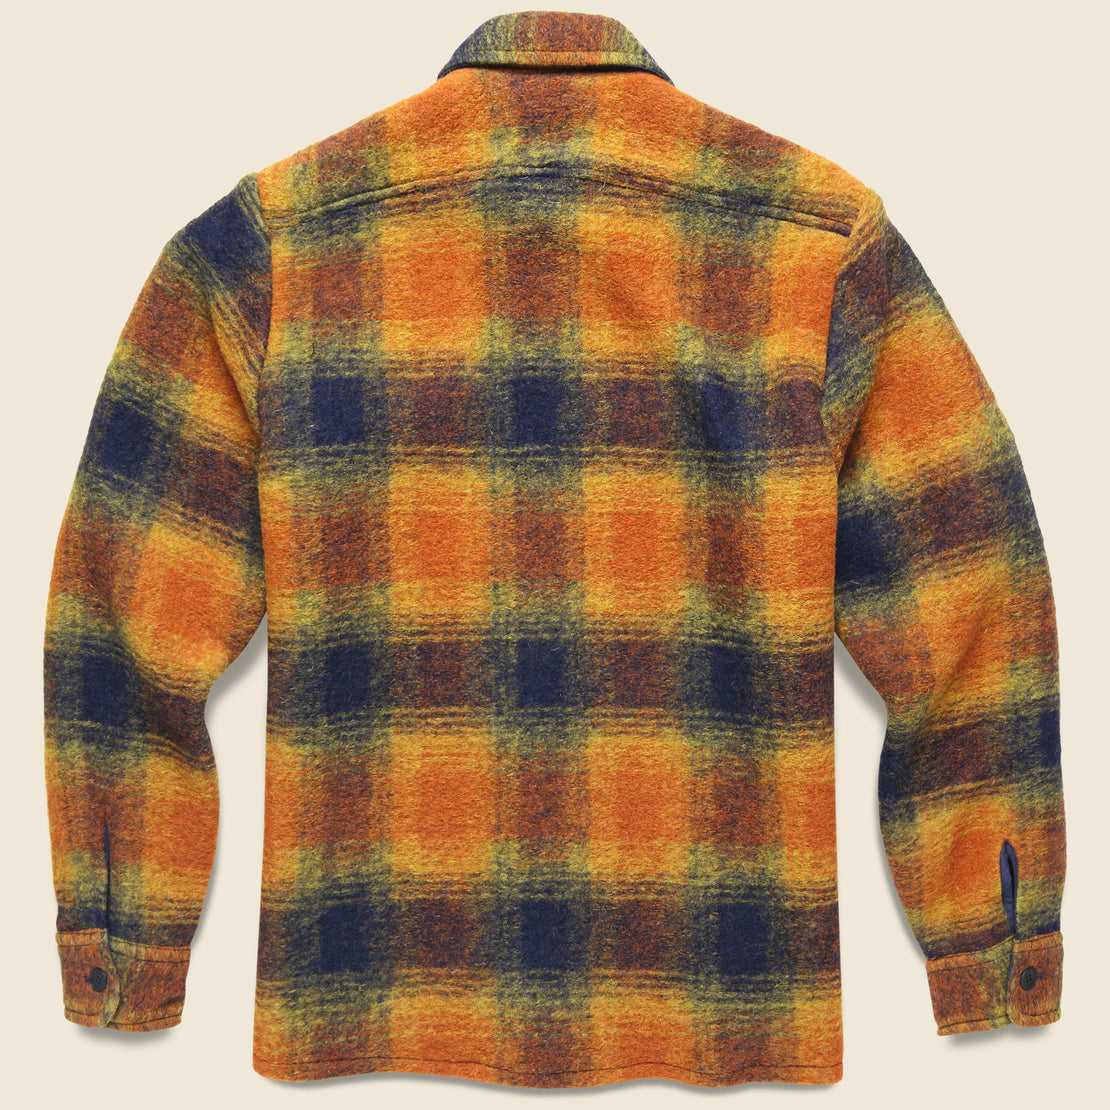 Whiting Overshirt - Pine Orange Wool - Wax London - STAG Provisions - Tops - L/S Woven - Plaid